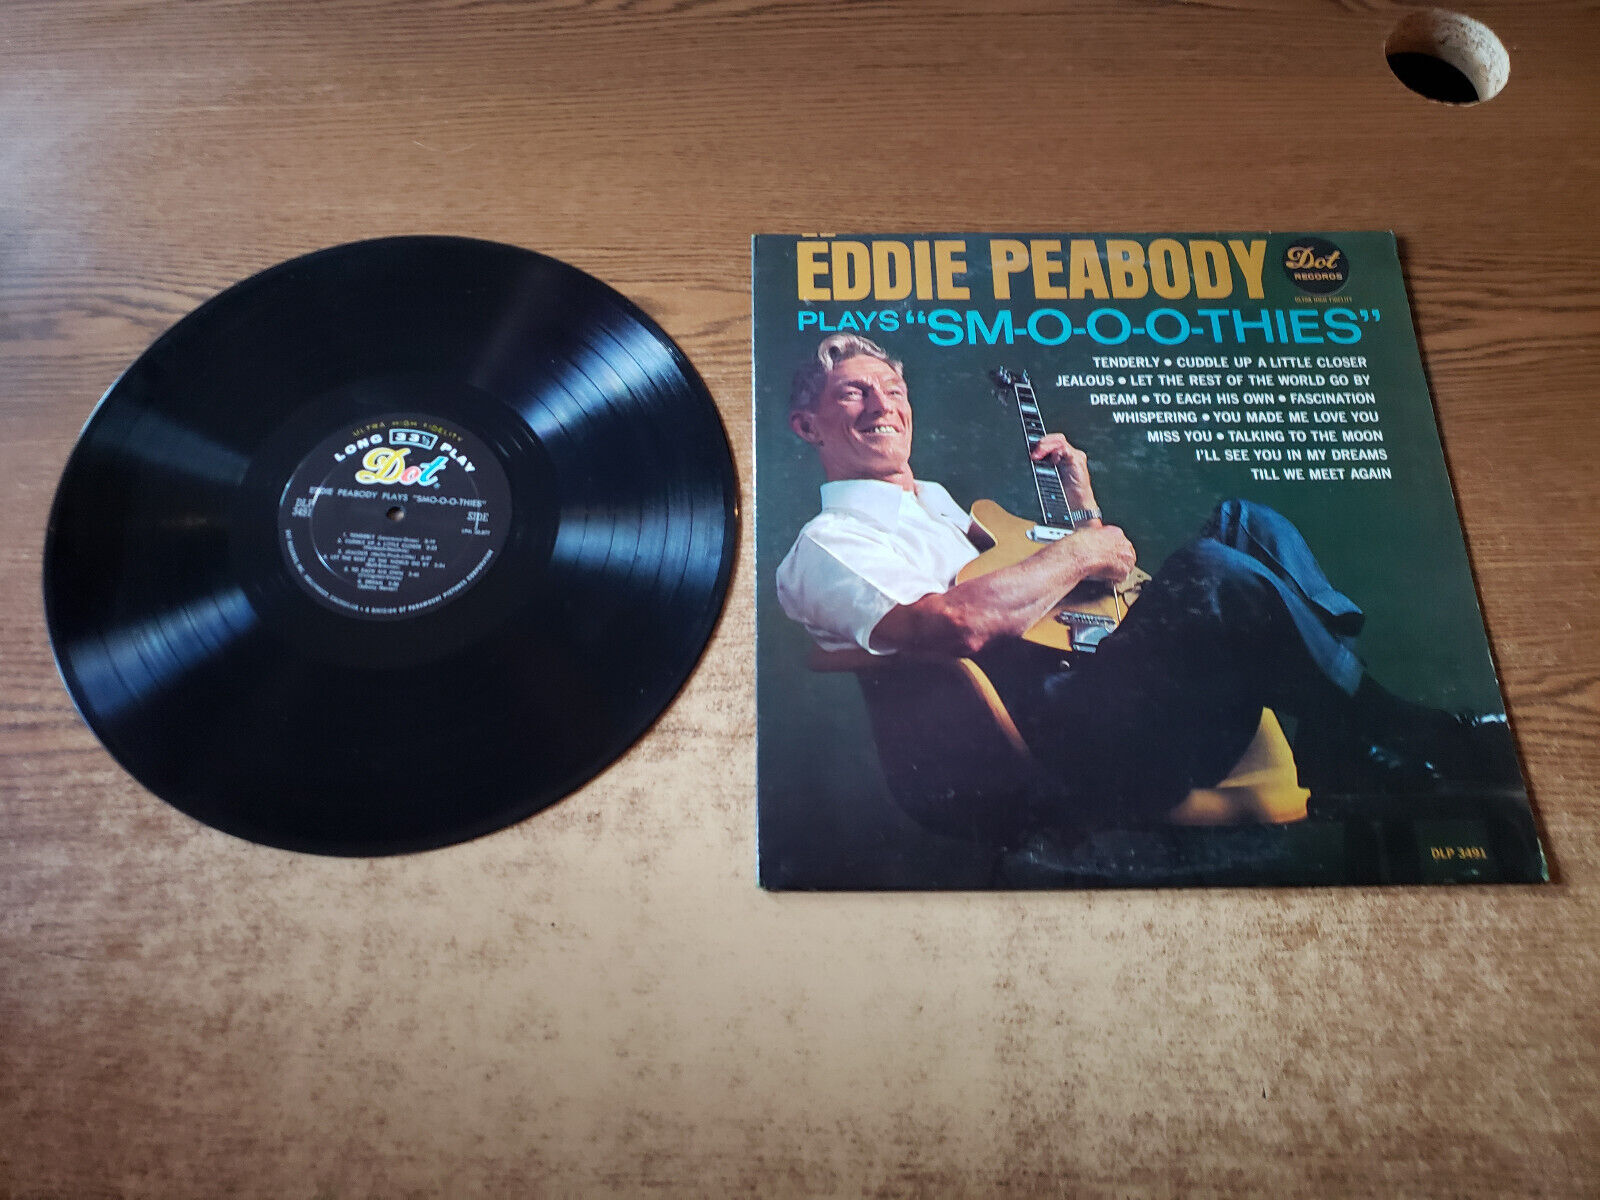 SIGNED AUTHENTICATED 1960s MINT-EXC Eddie Peabody Plays Sm-o-o-o-thies 3491 LP33